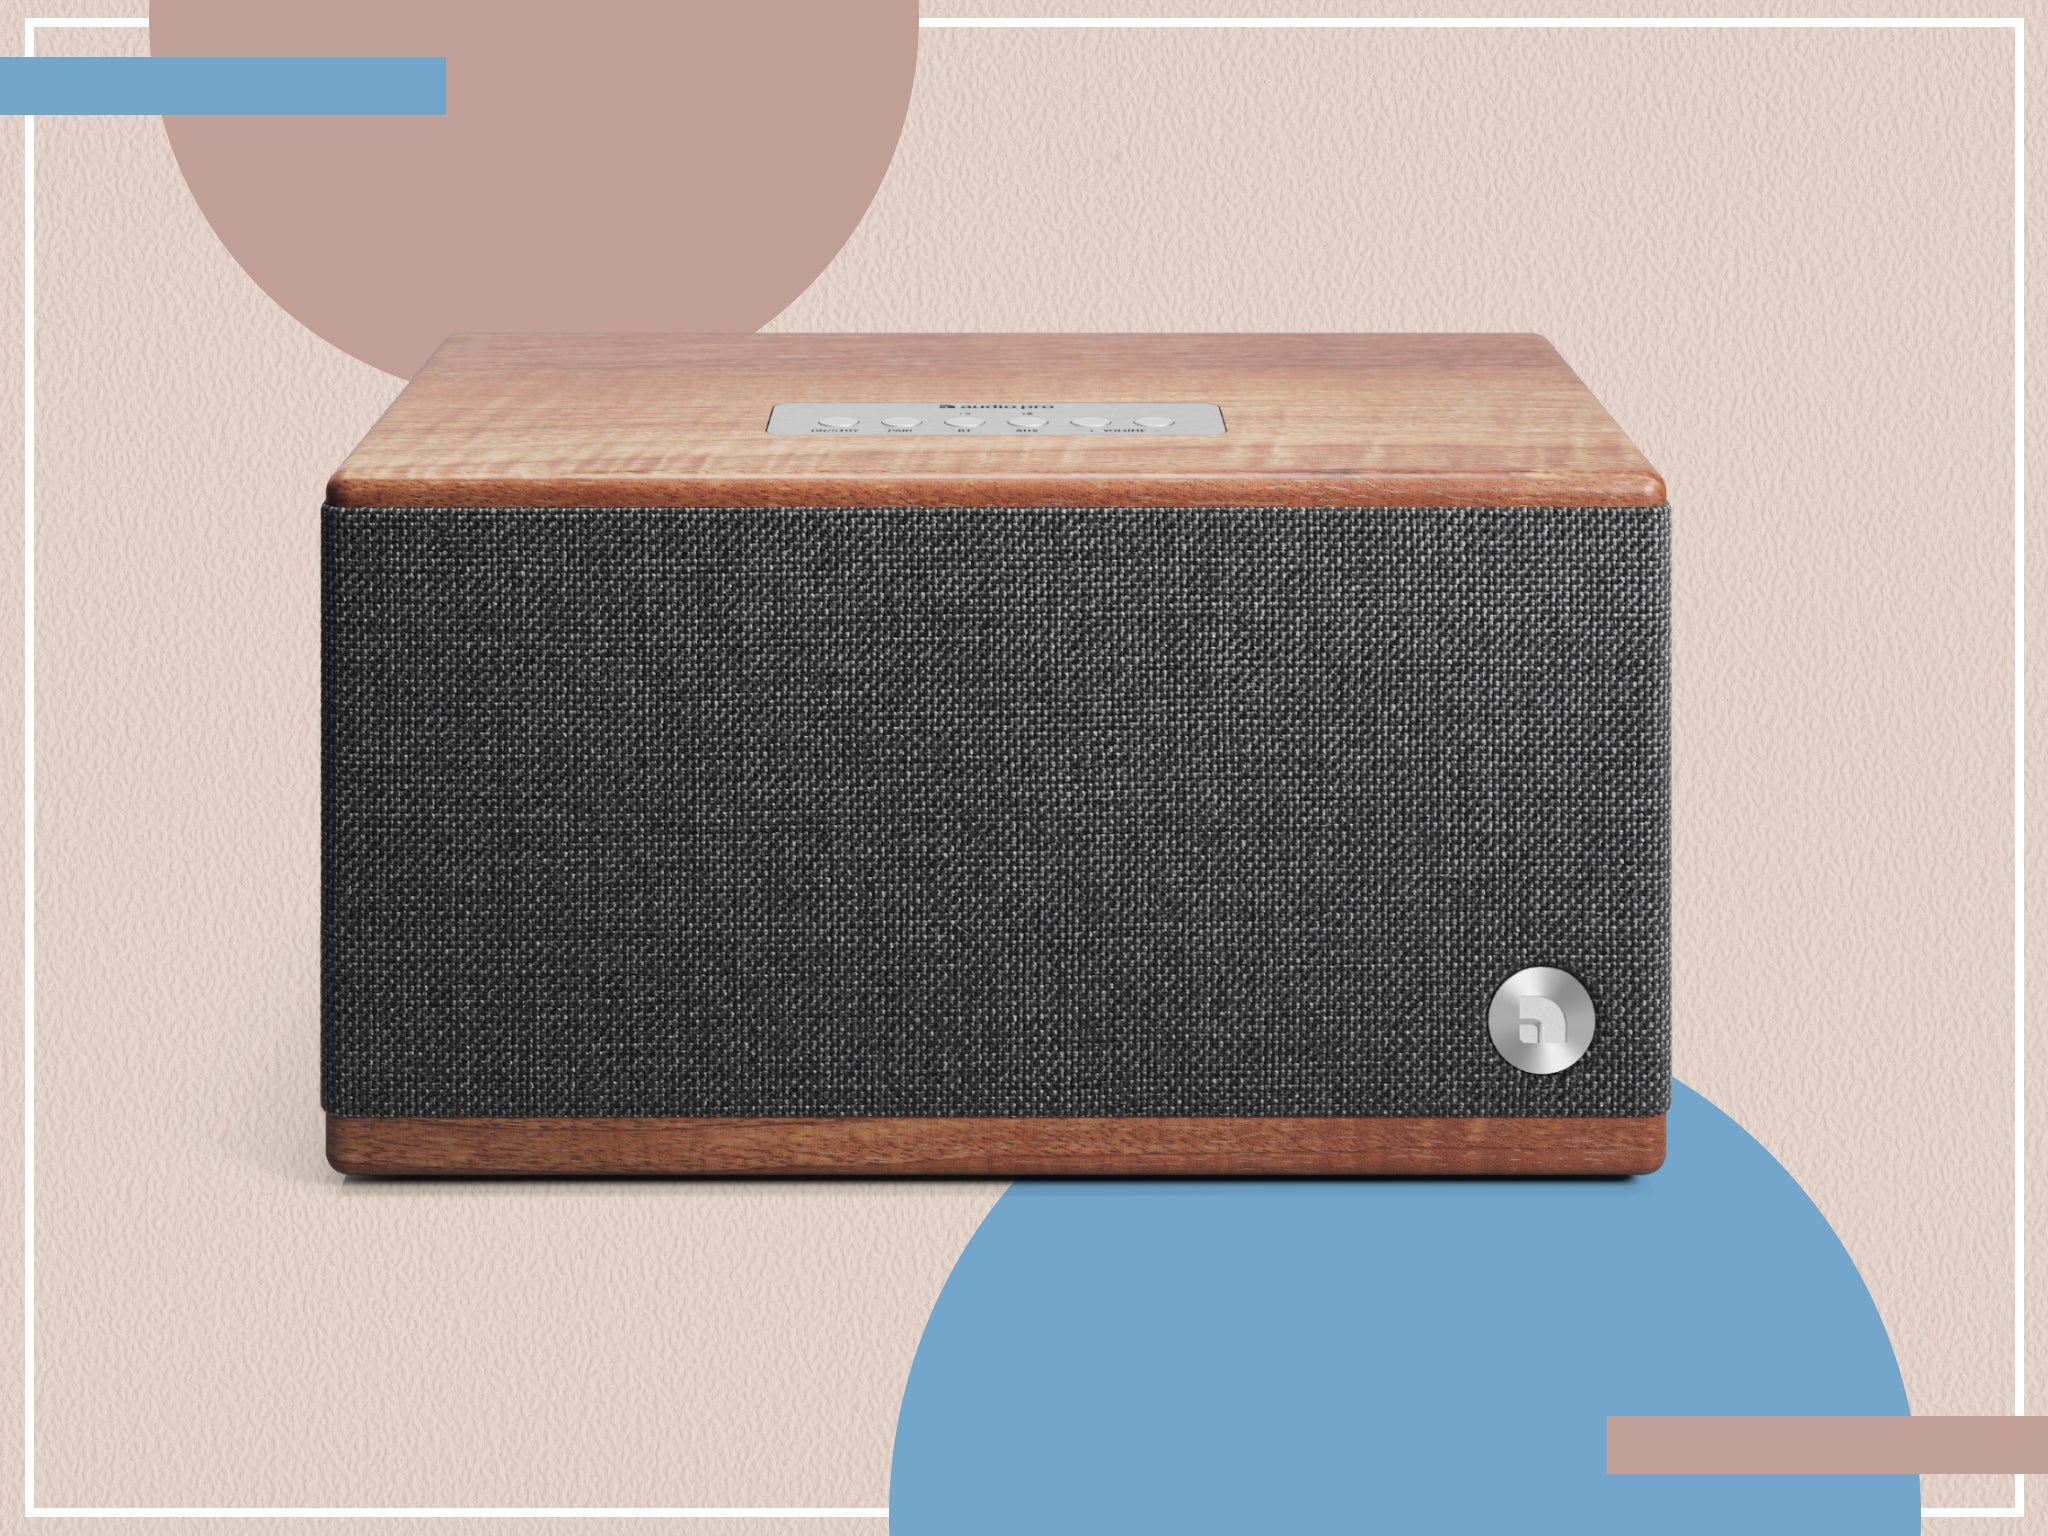 The high-tech audio set up does a great job for a compact speaker